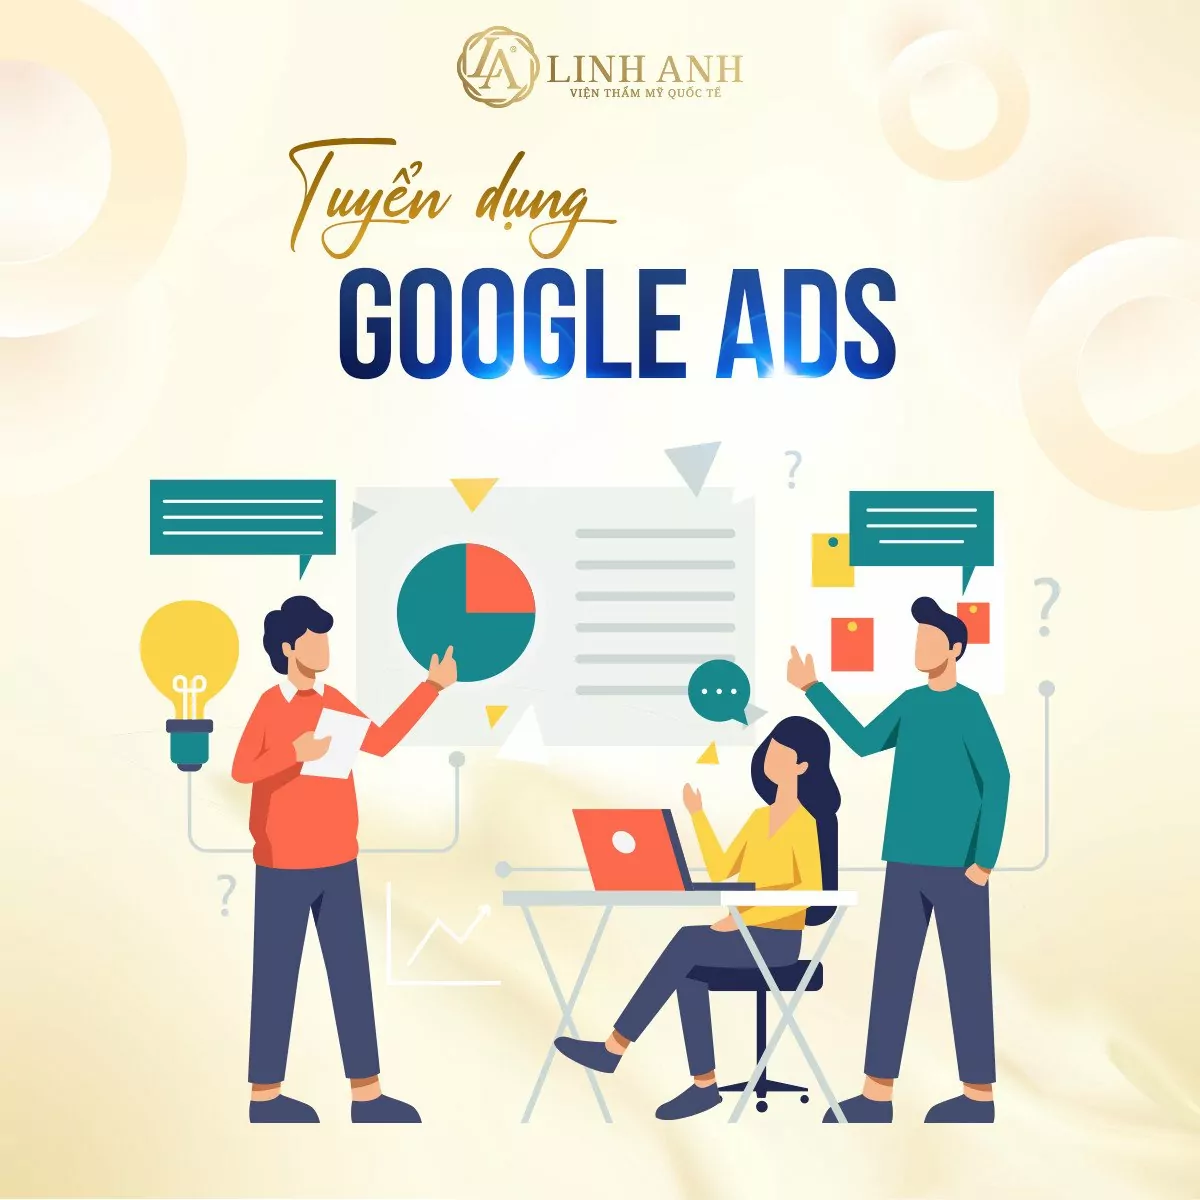 Tuyển dụng gg ads Linh Anh